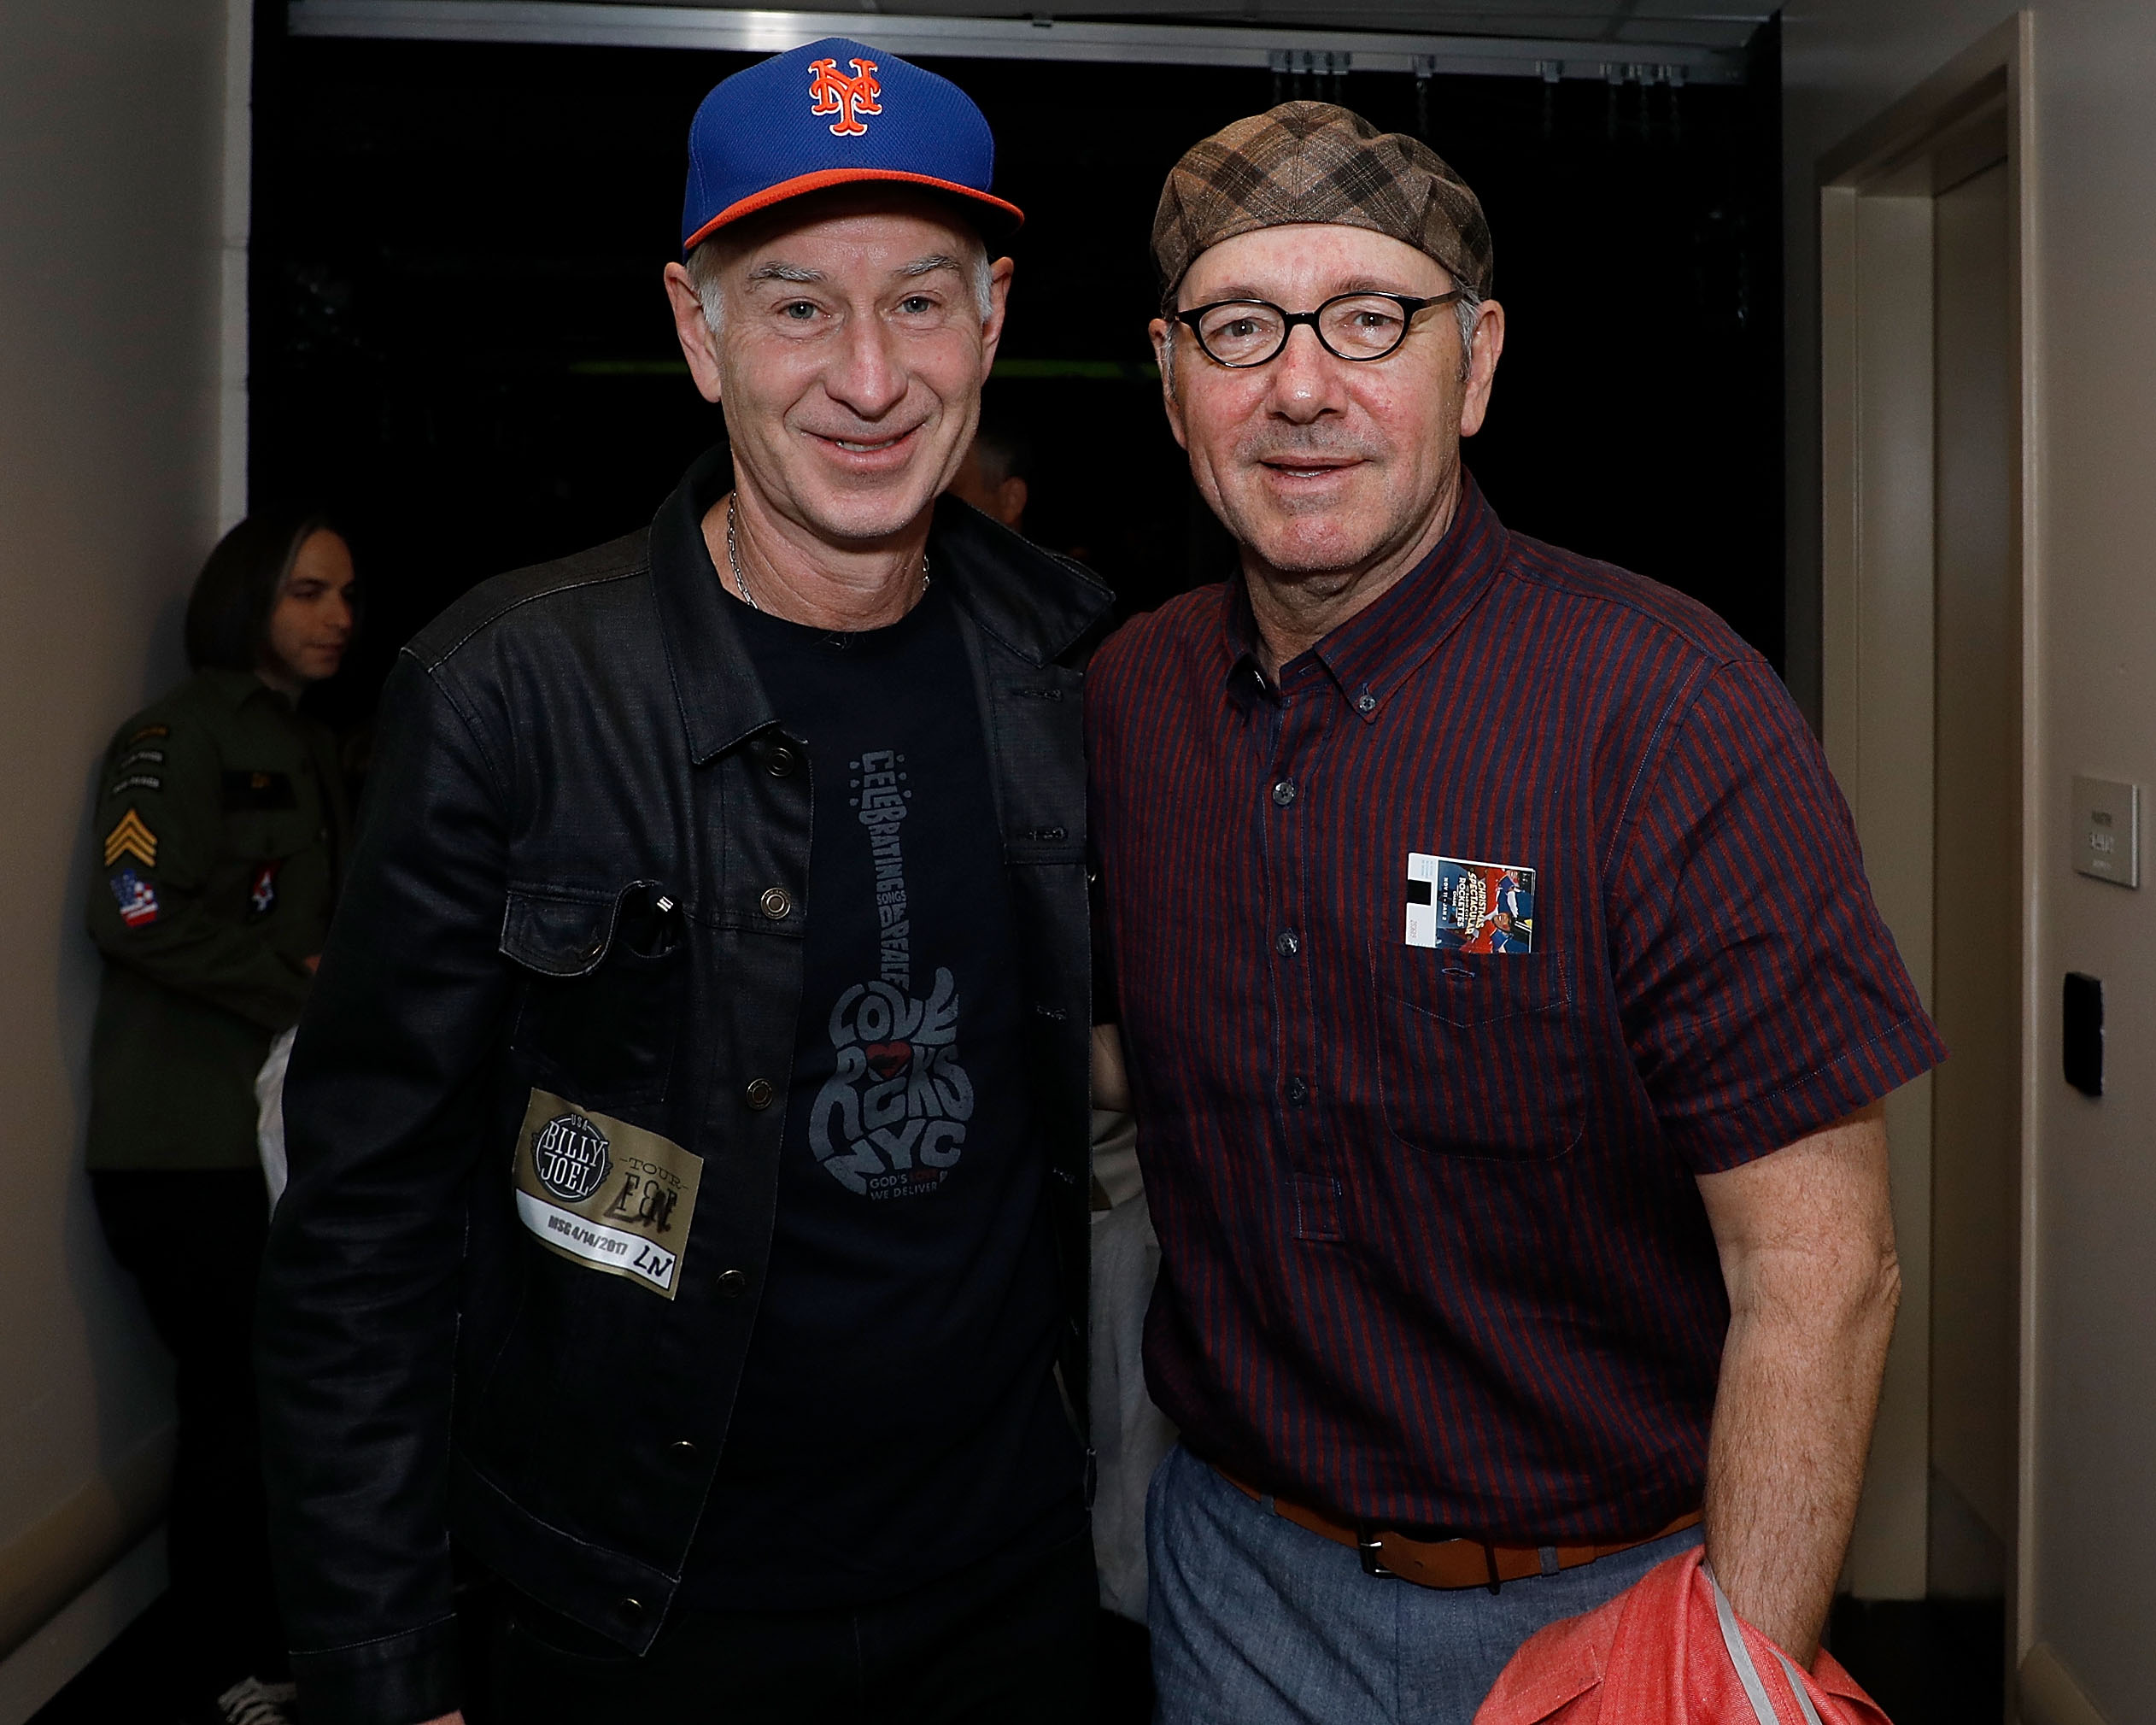 NEW YORK, NY - APRIL 14: (EXCLUSIVE COVERAGE) John McEnroe and Kevin Spacey attend Billy Joel's 40th consecutive sold-out show at Madison Square Garden on April 14, 2017 in New York City. (Photo by Myrna M. Suarez/Getty Images)